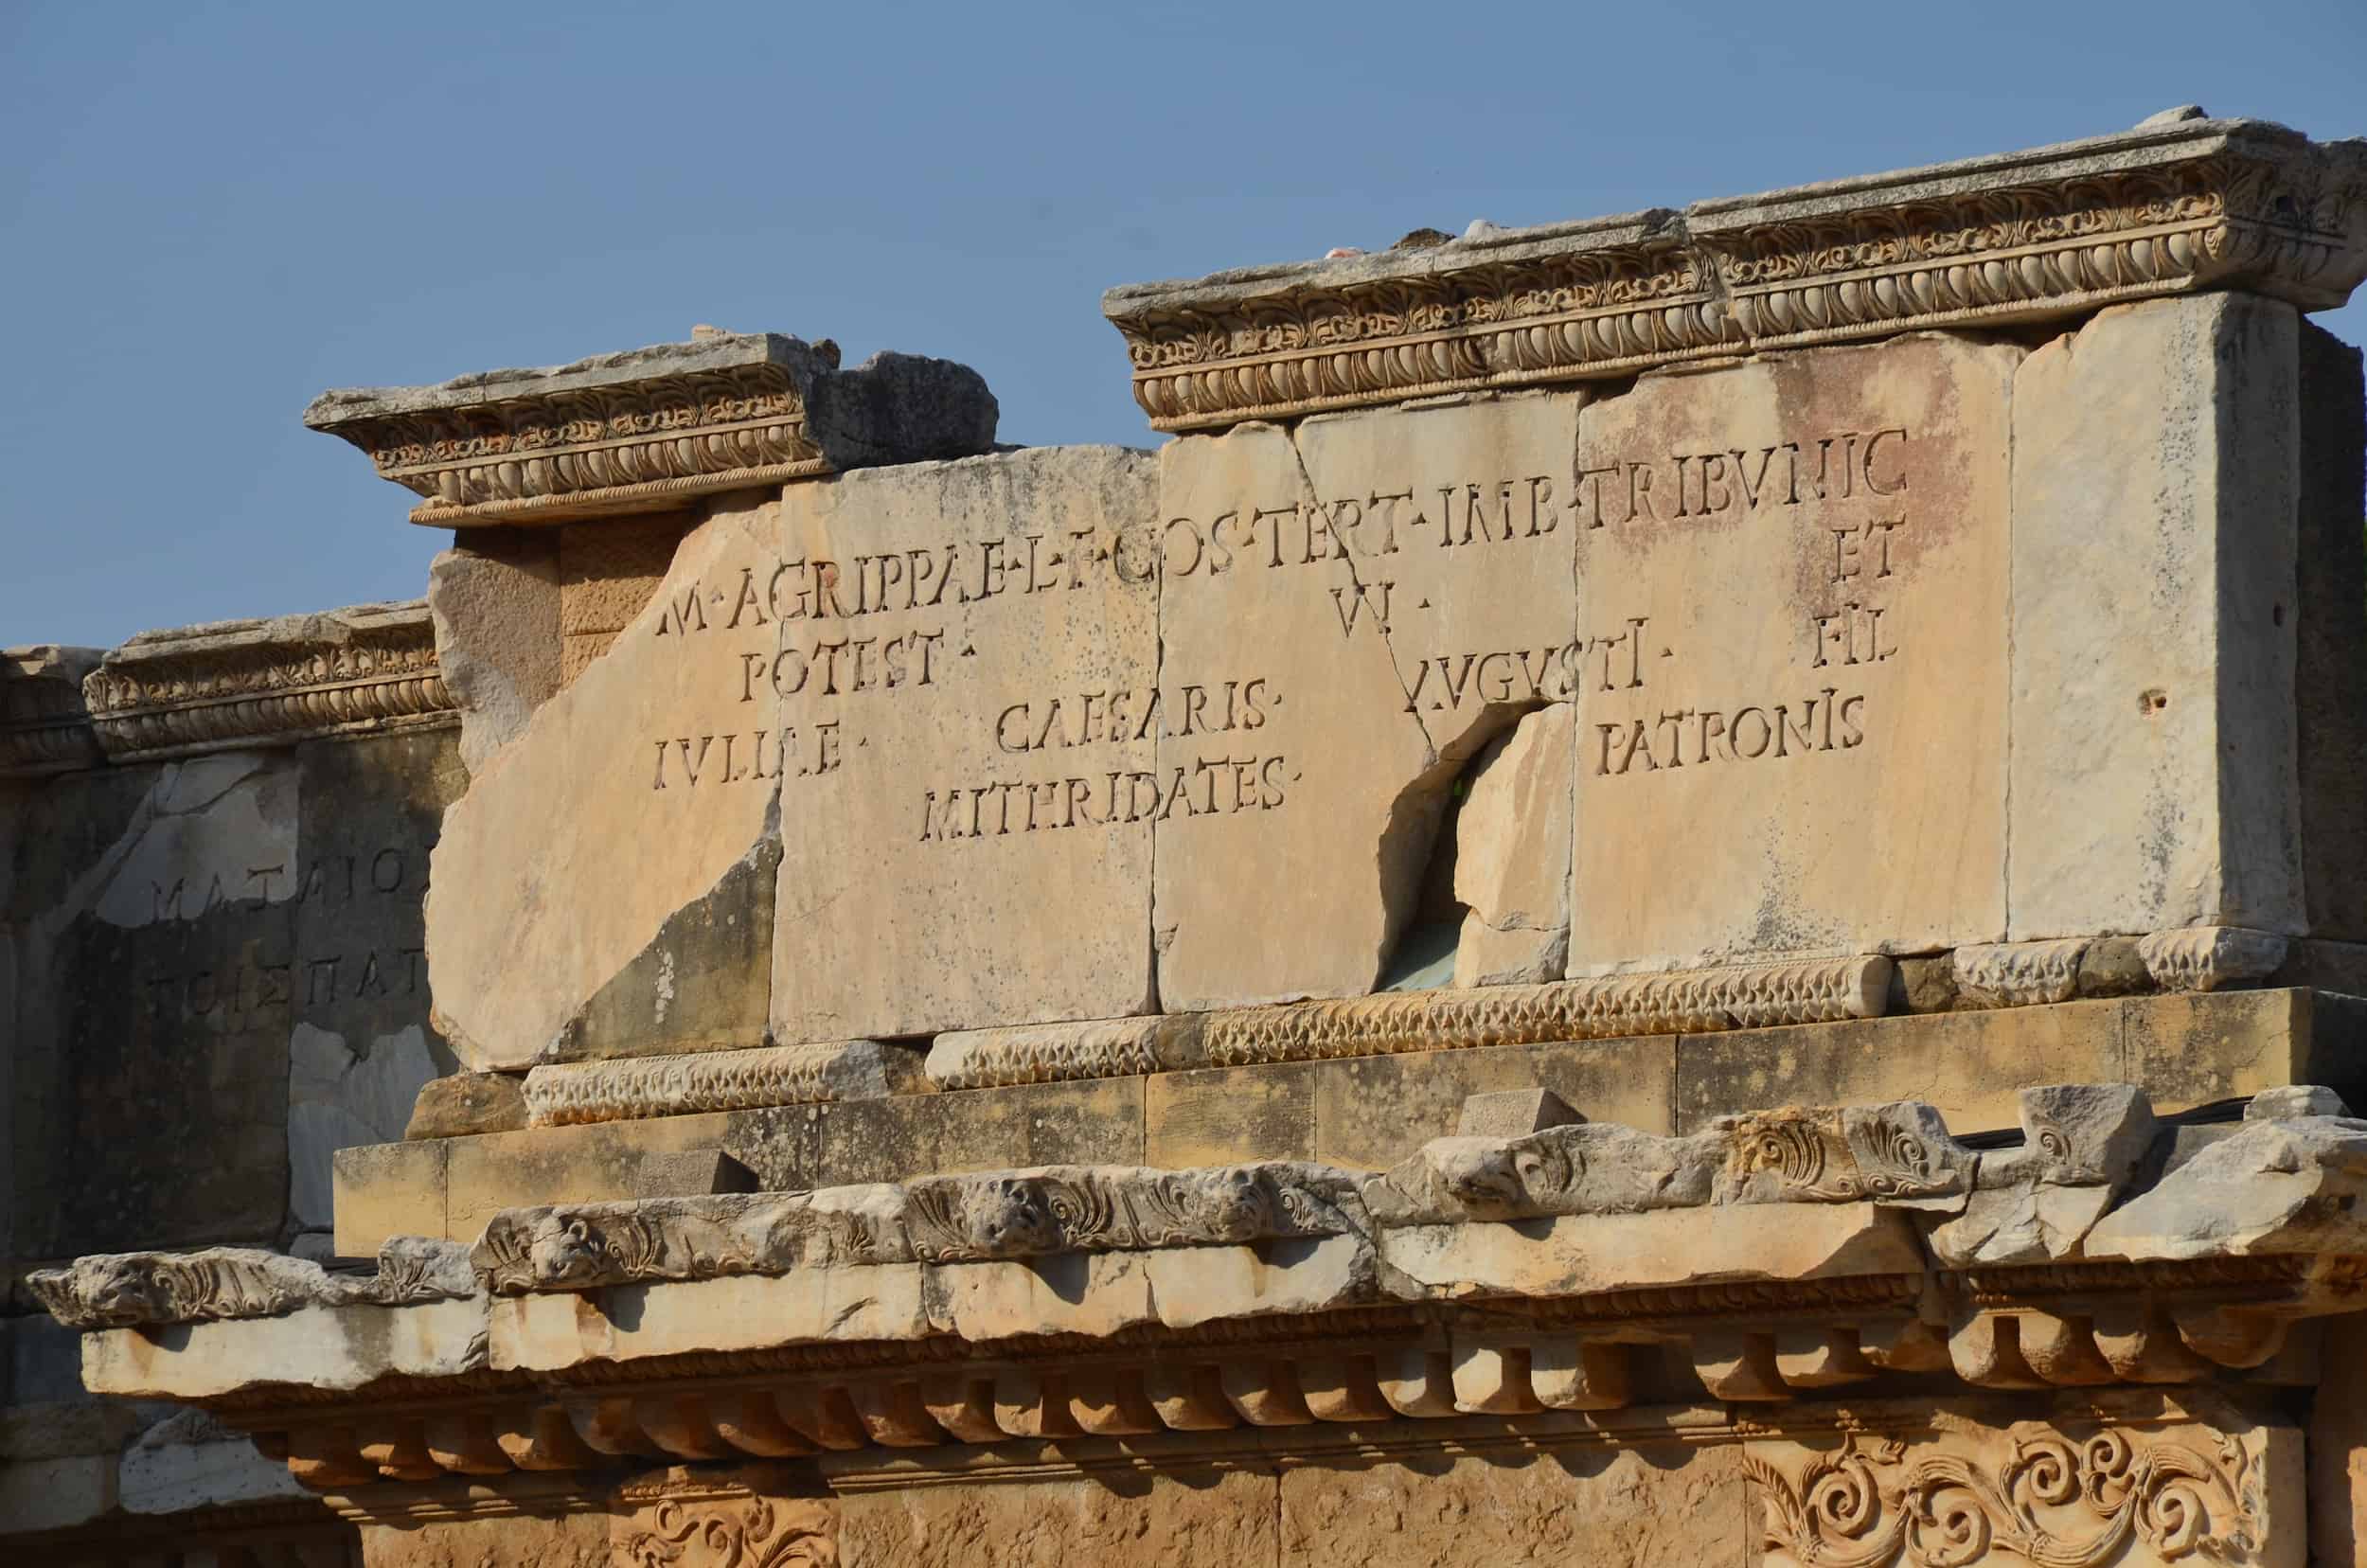 Inscription signed by Mithridates at the top of the Gate of Mazeus and Mithridates in Ephesus